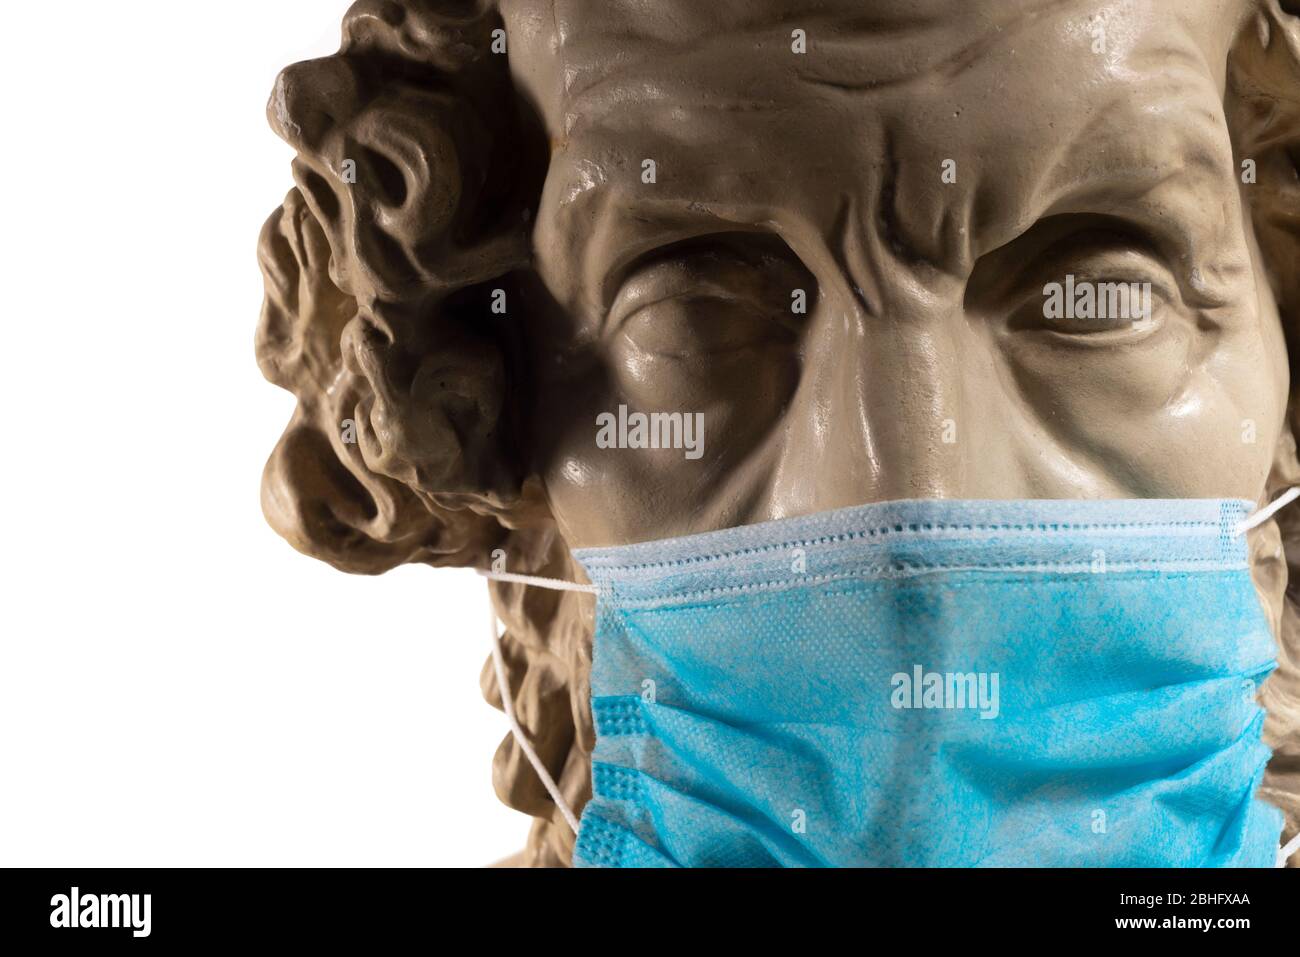 Gypsum Copy of Ancient Statue Homer Wearing Virus Face Mask Stock Photo